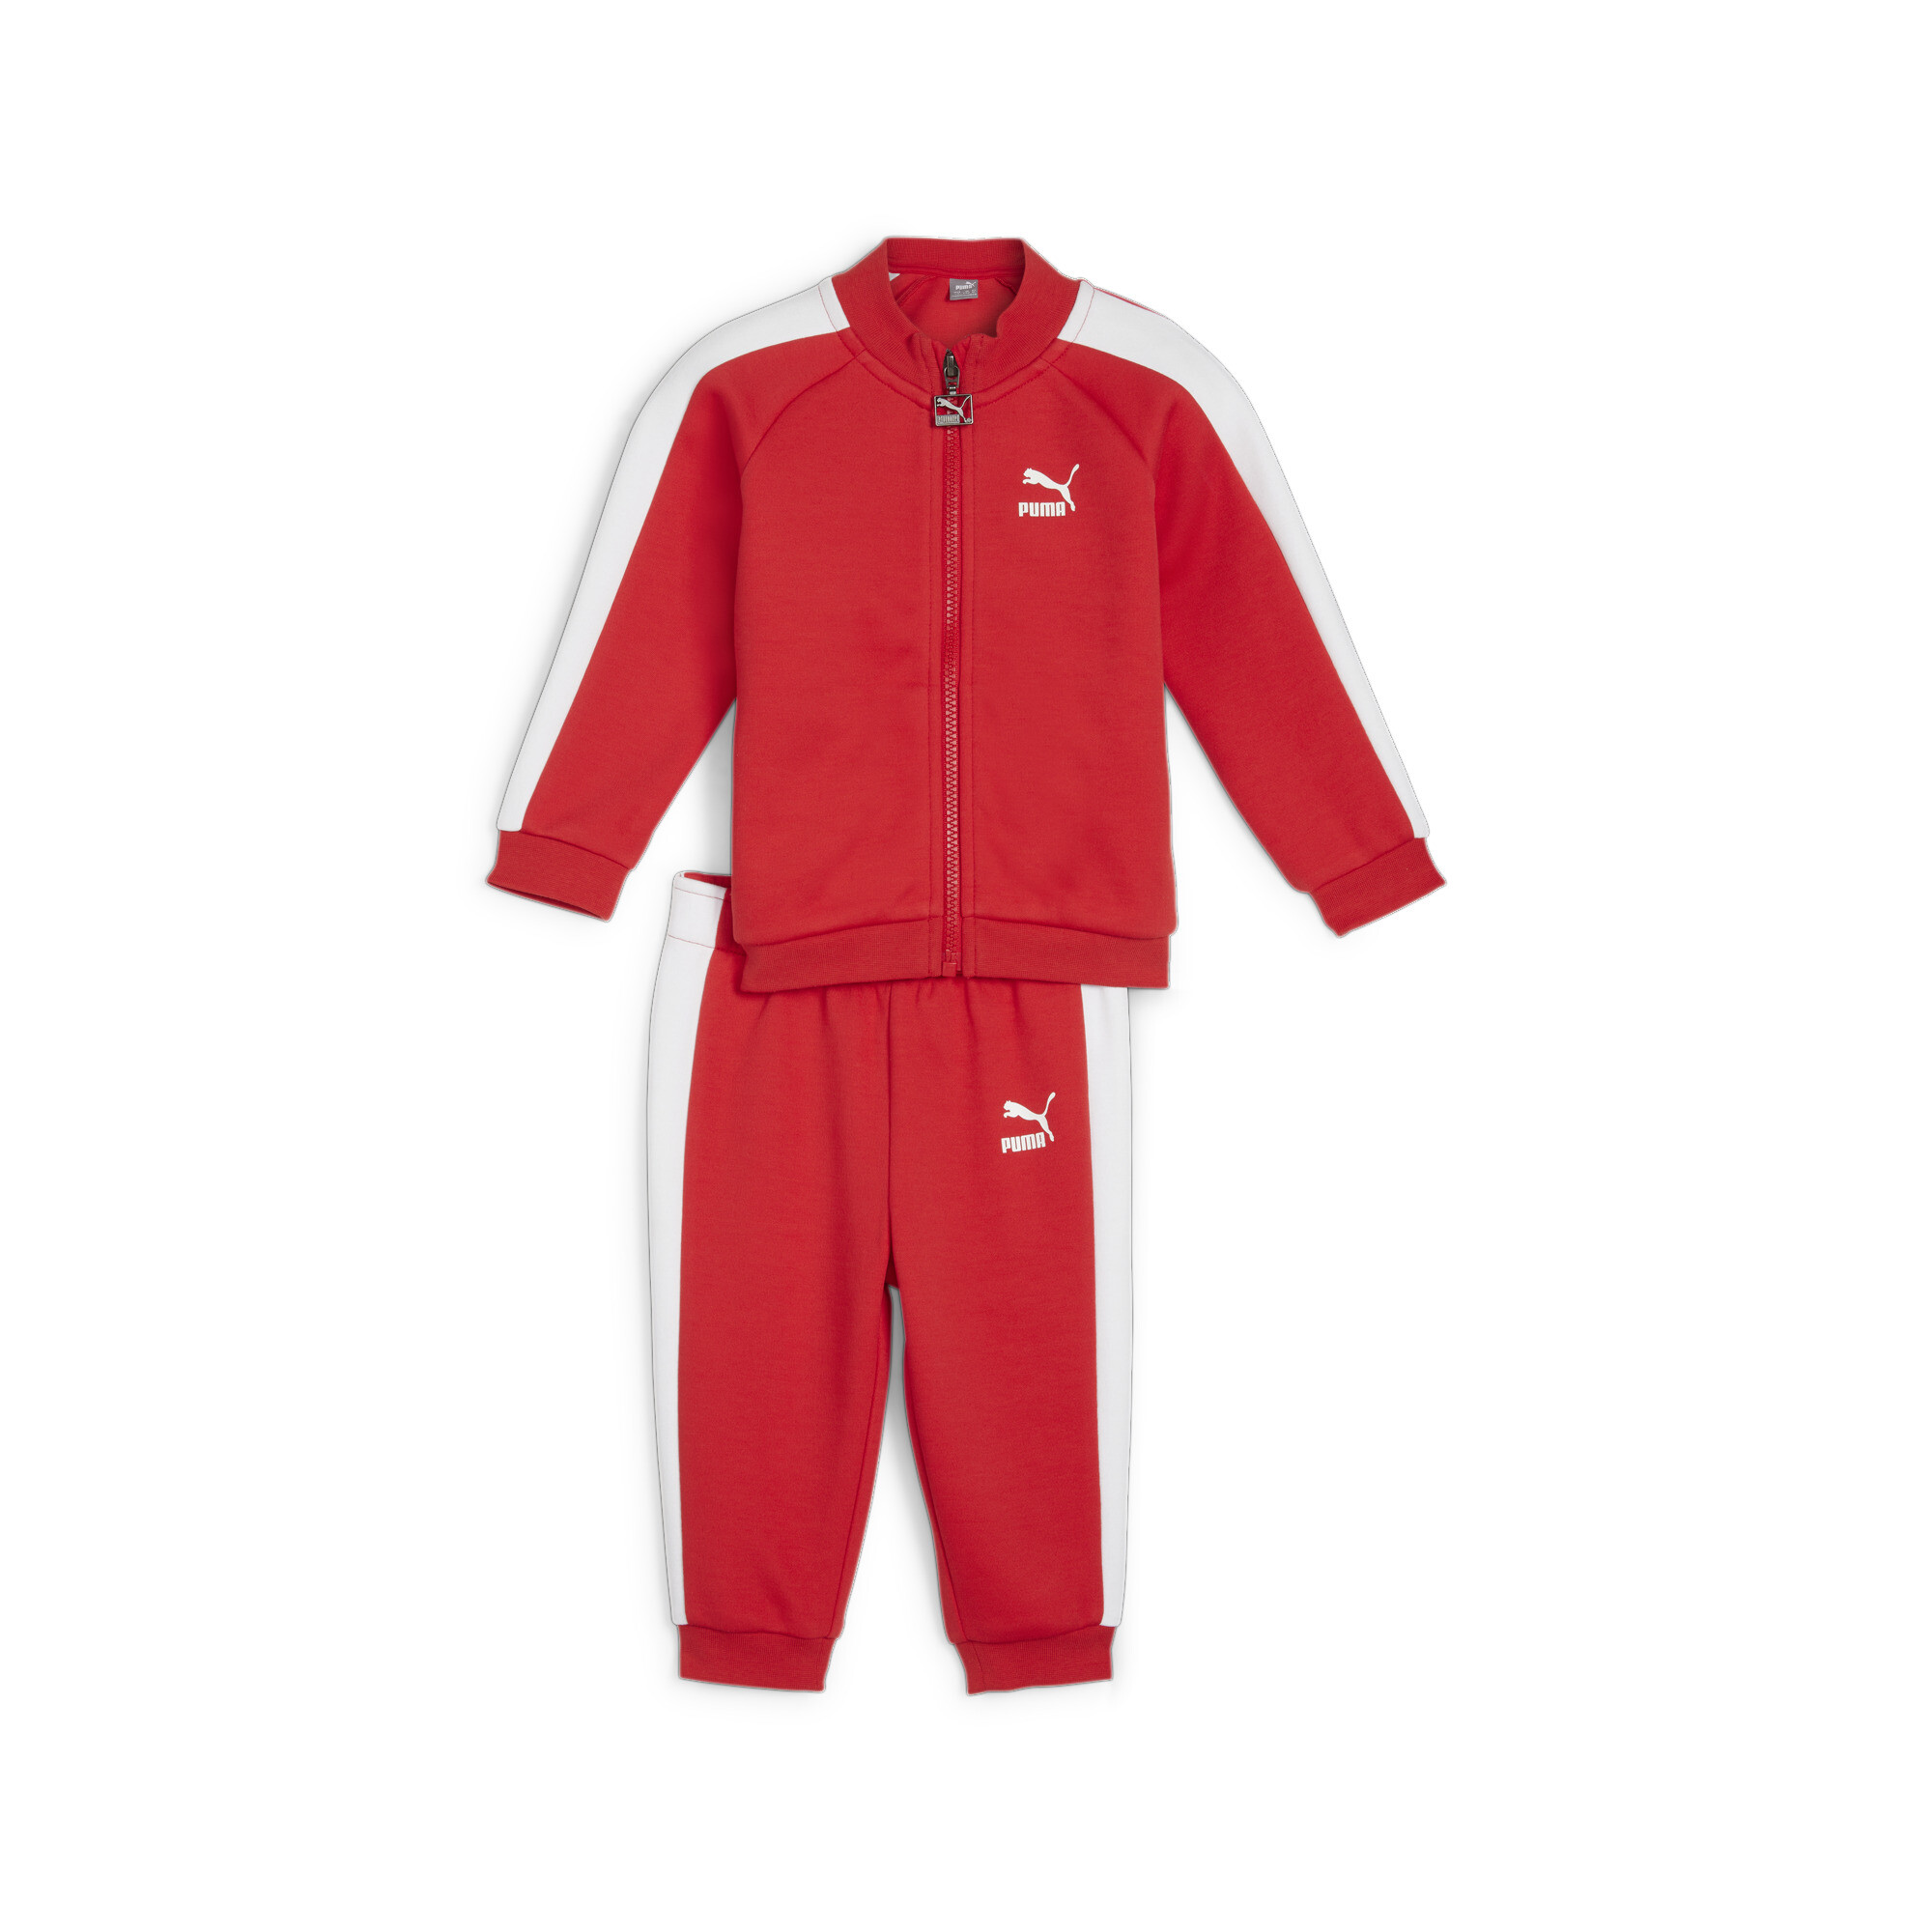 Puma MINICATS T7 ICONIC Baby Tracksuit Set, Red, Size 2-3Y, Clothing